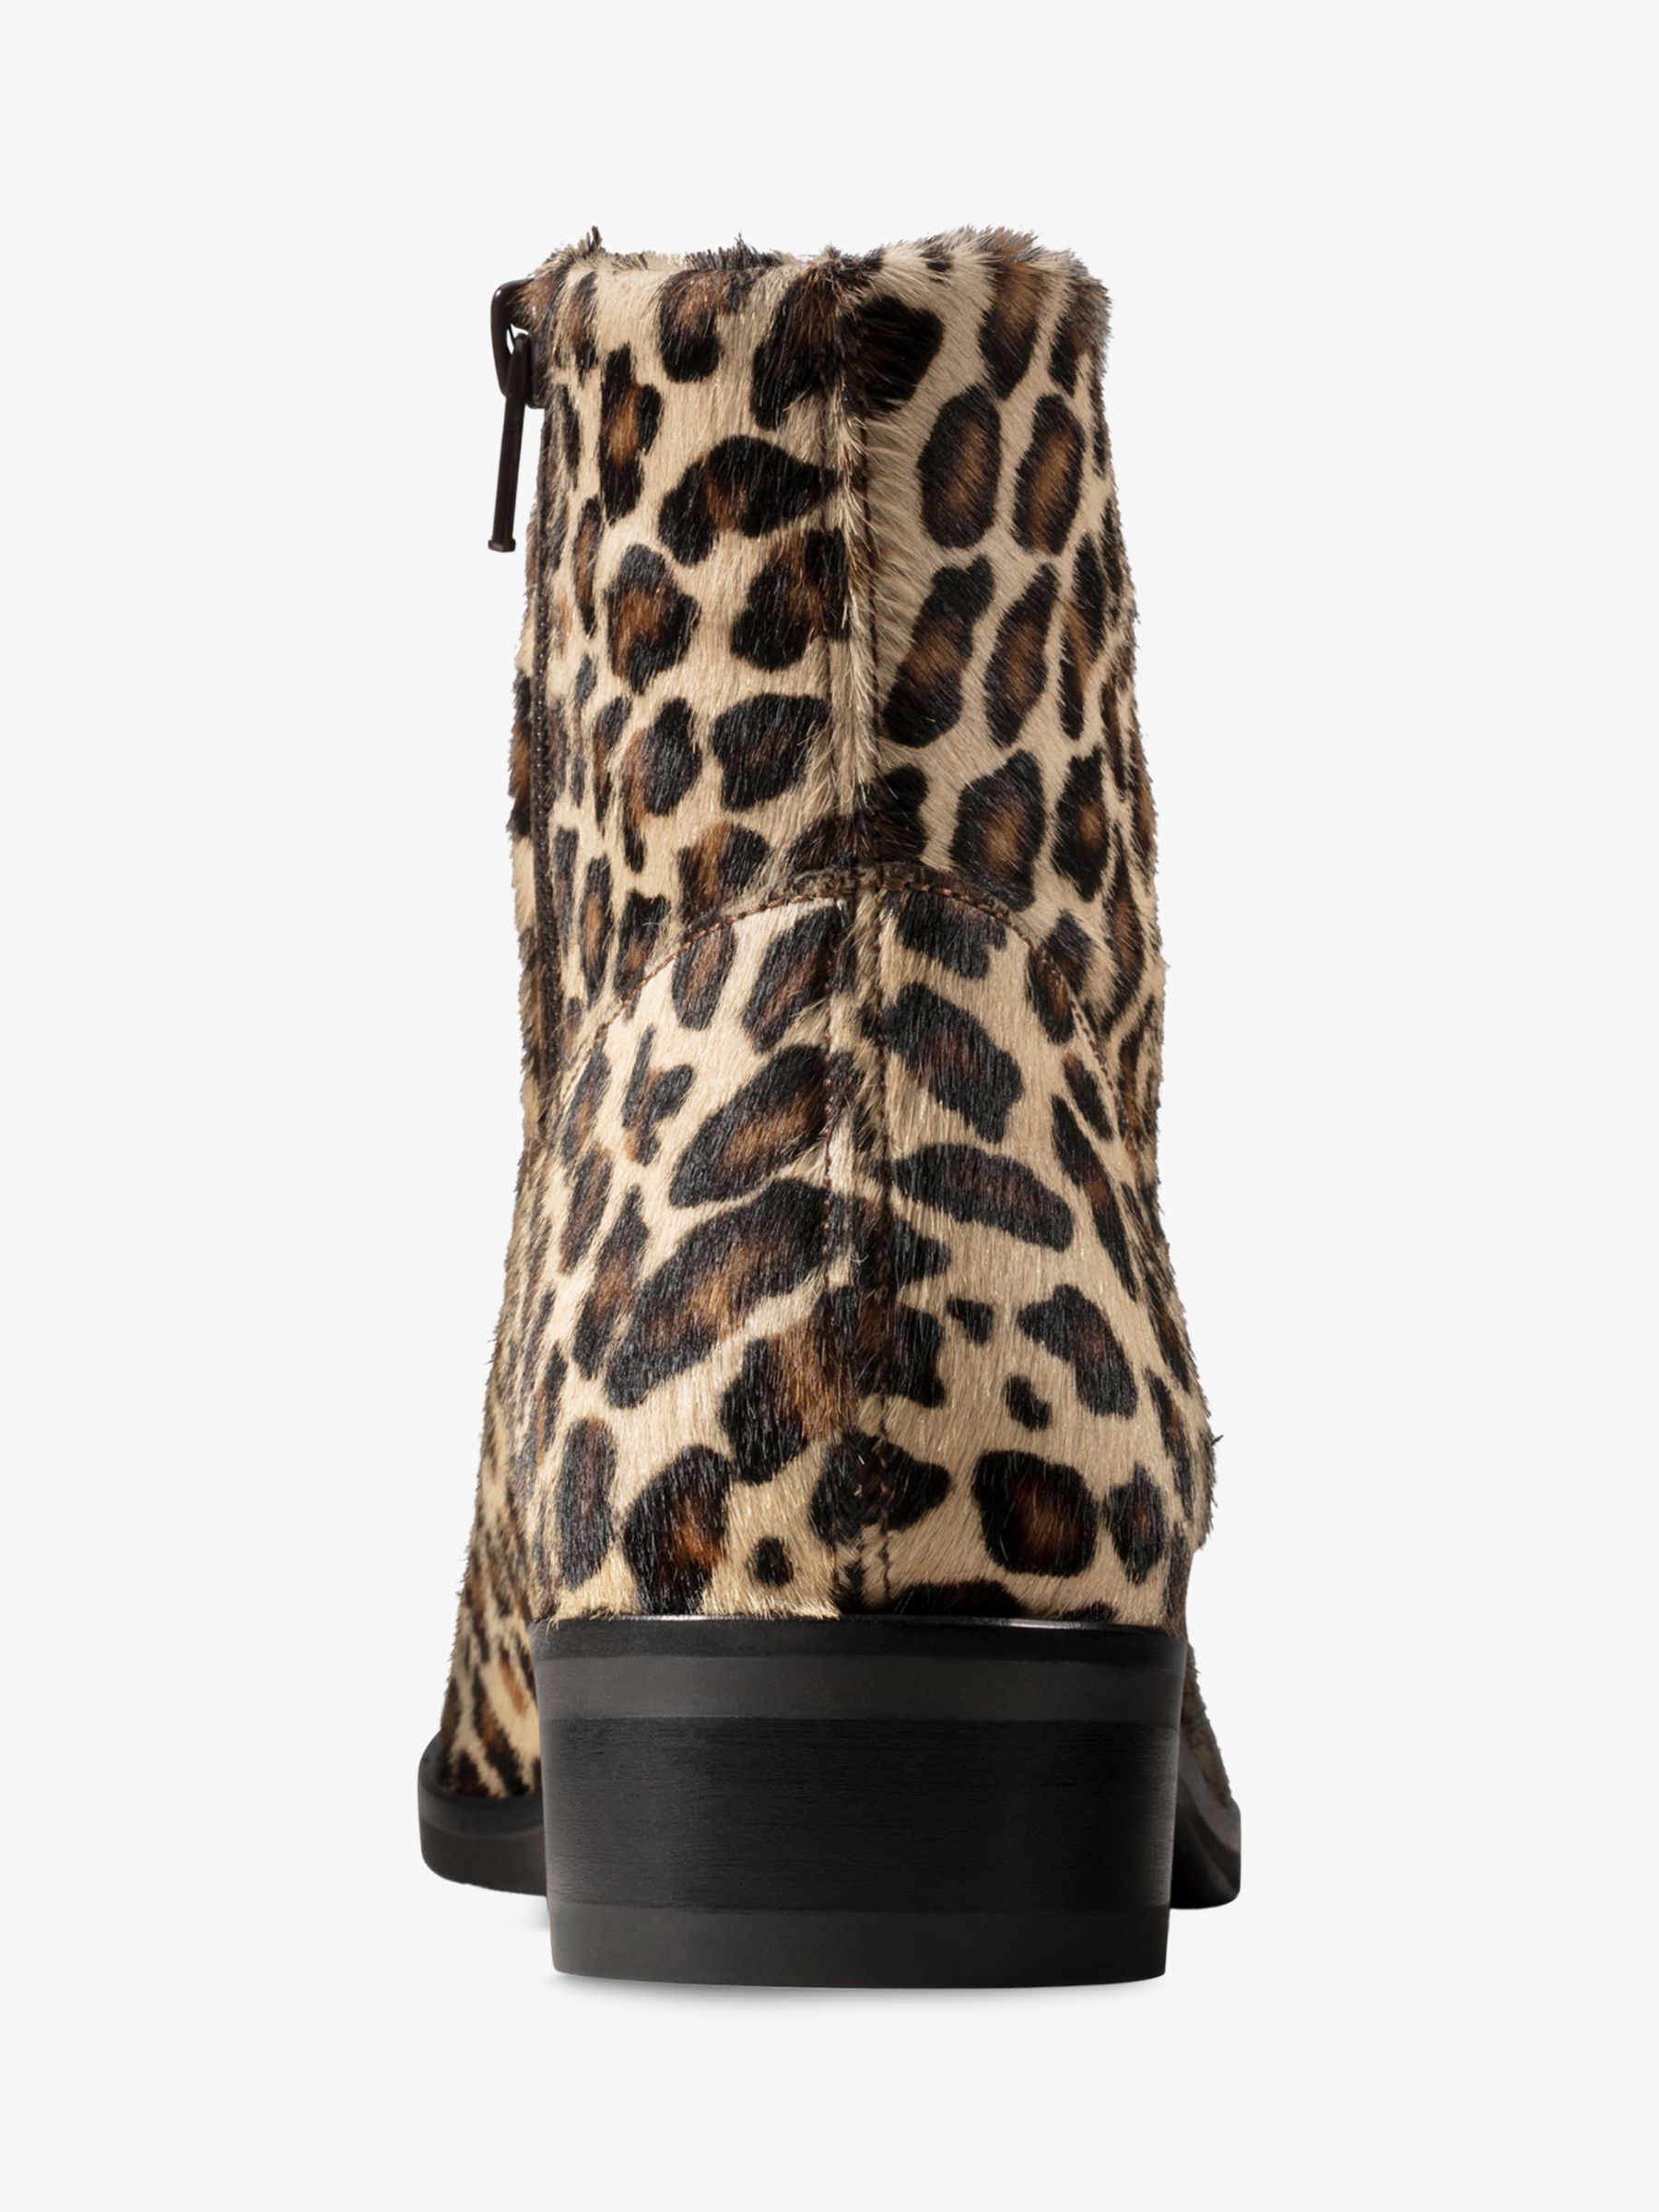 clarks leopard print ankle boots